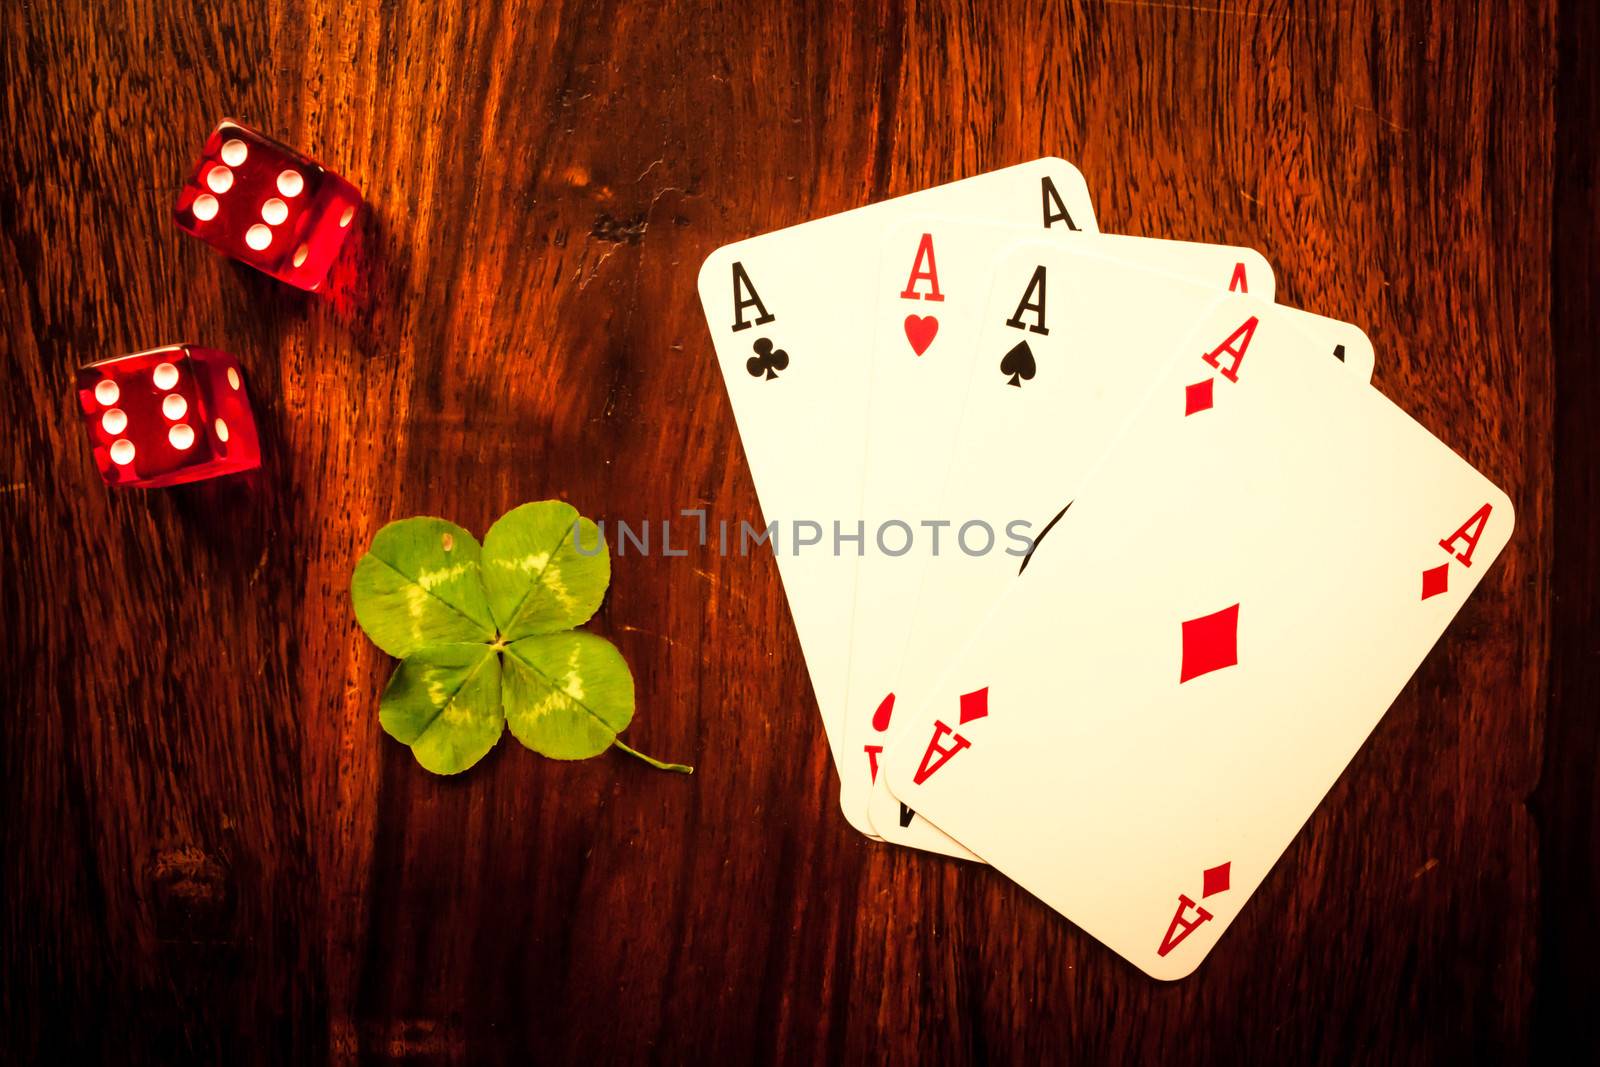 Gambling items on a wooden table